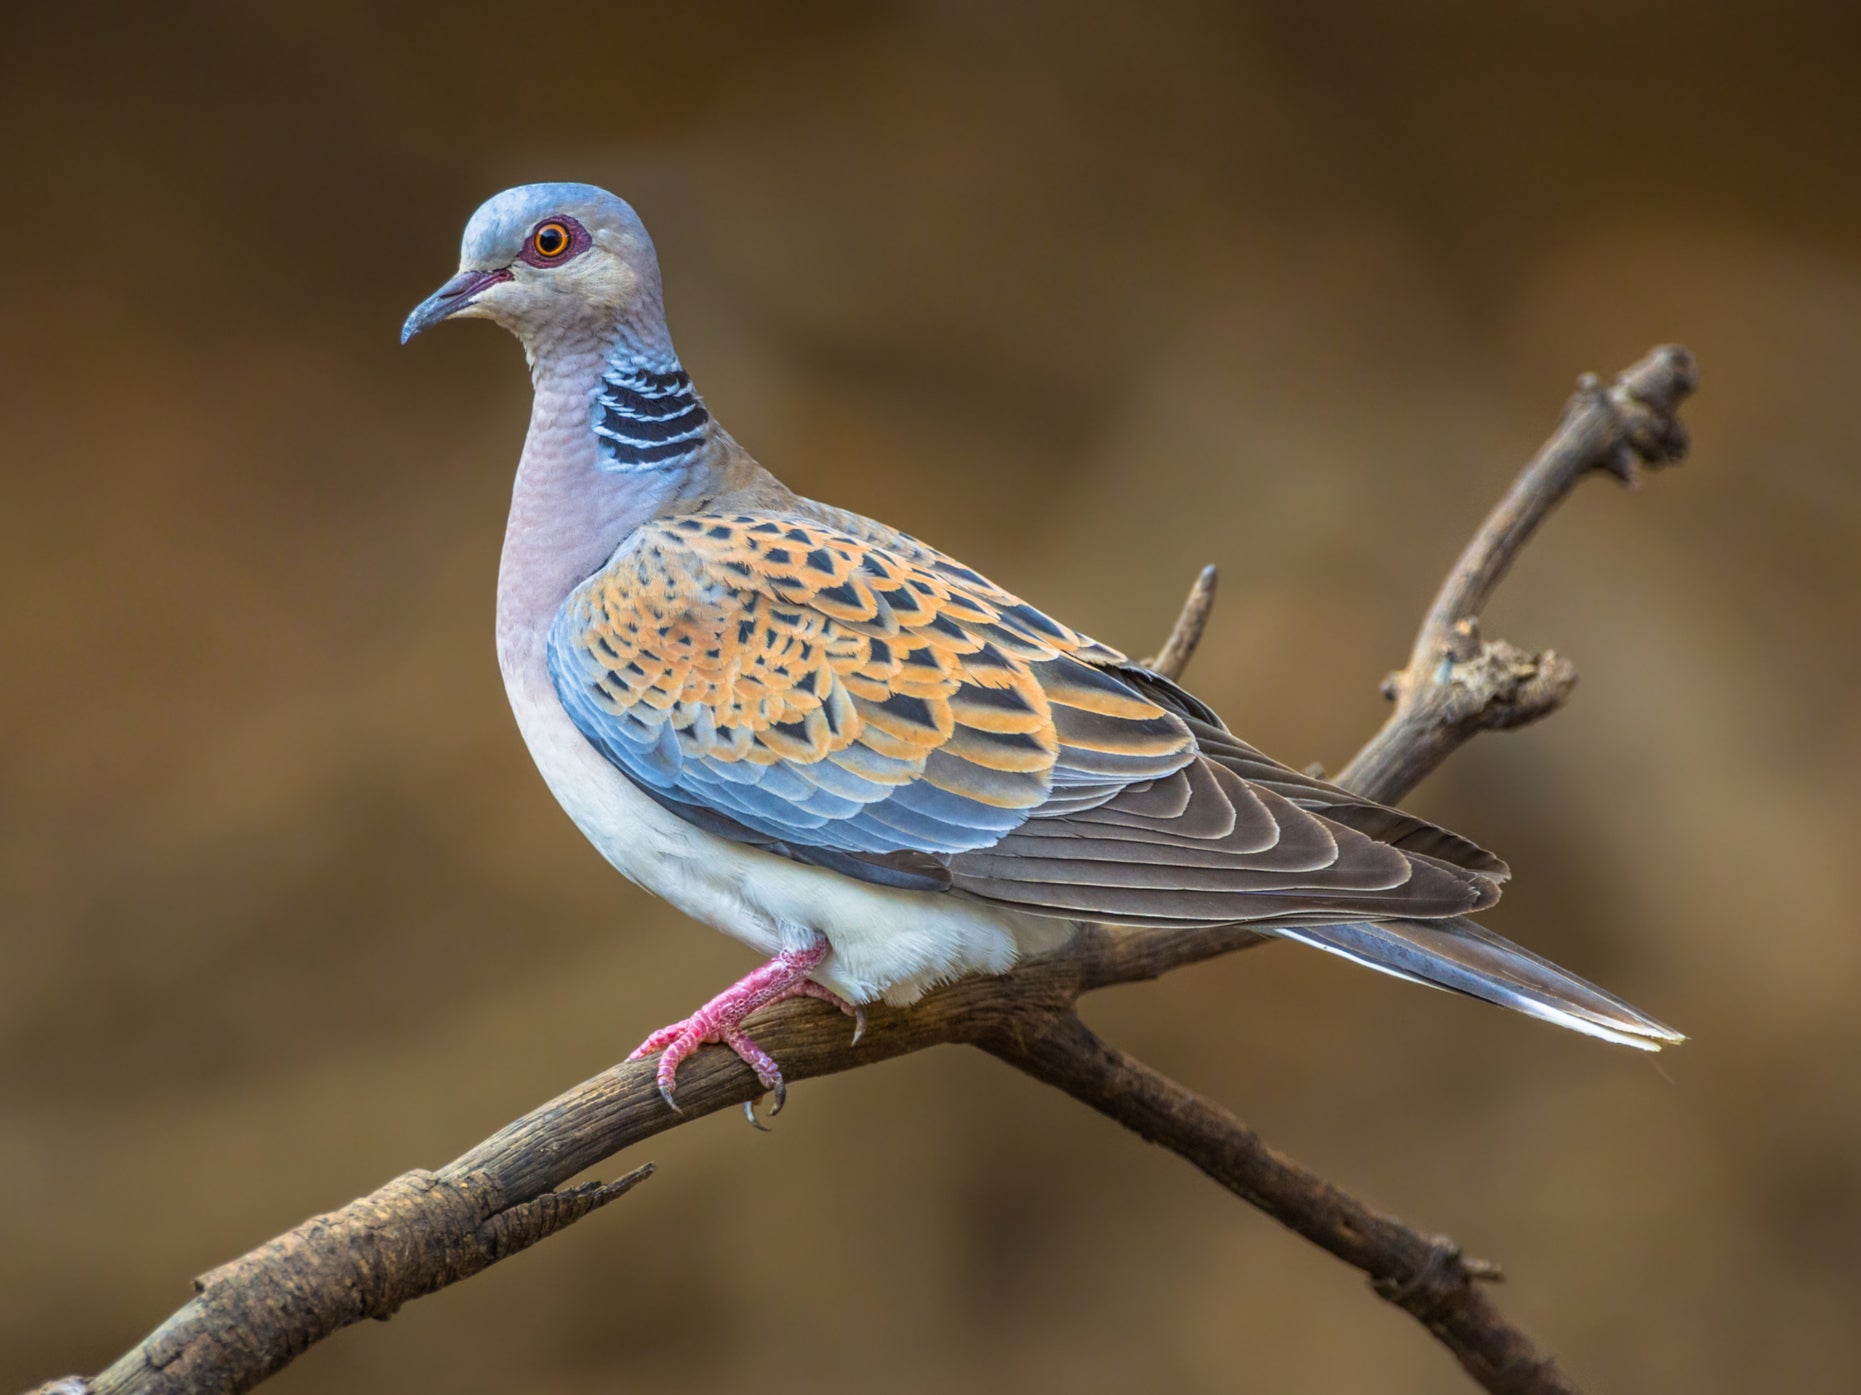 A turtle dove is now a rare sight in the UK. Overall, farmland birds have declined by 55% since 1970